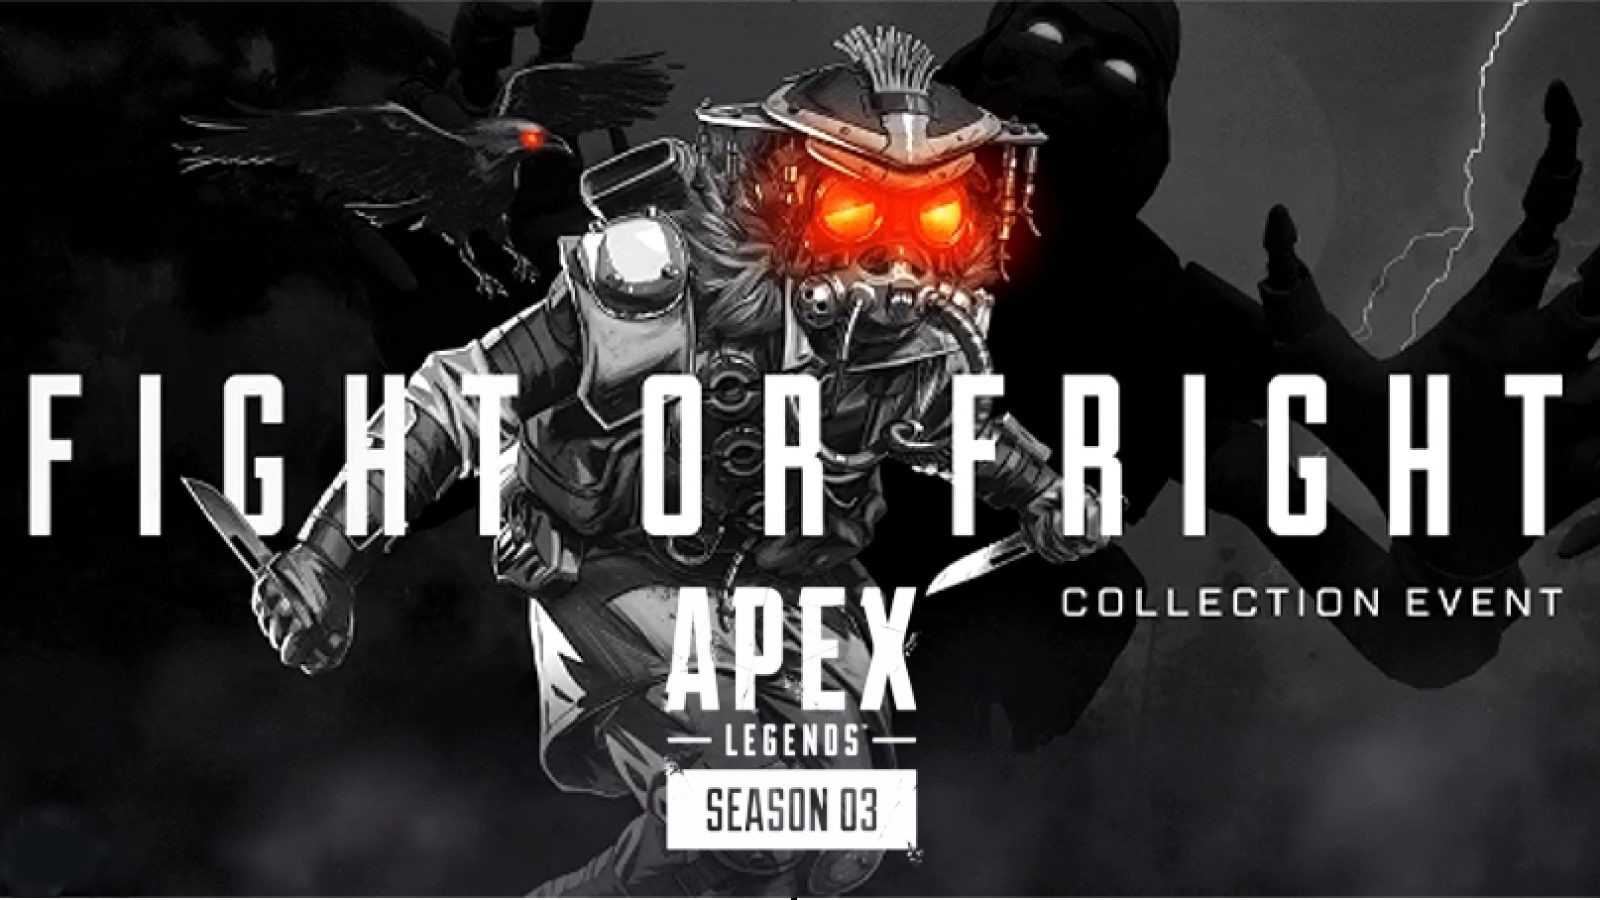 Apex Legends: Fight or Fright event trailer released